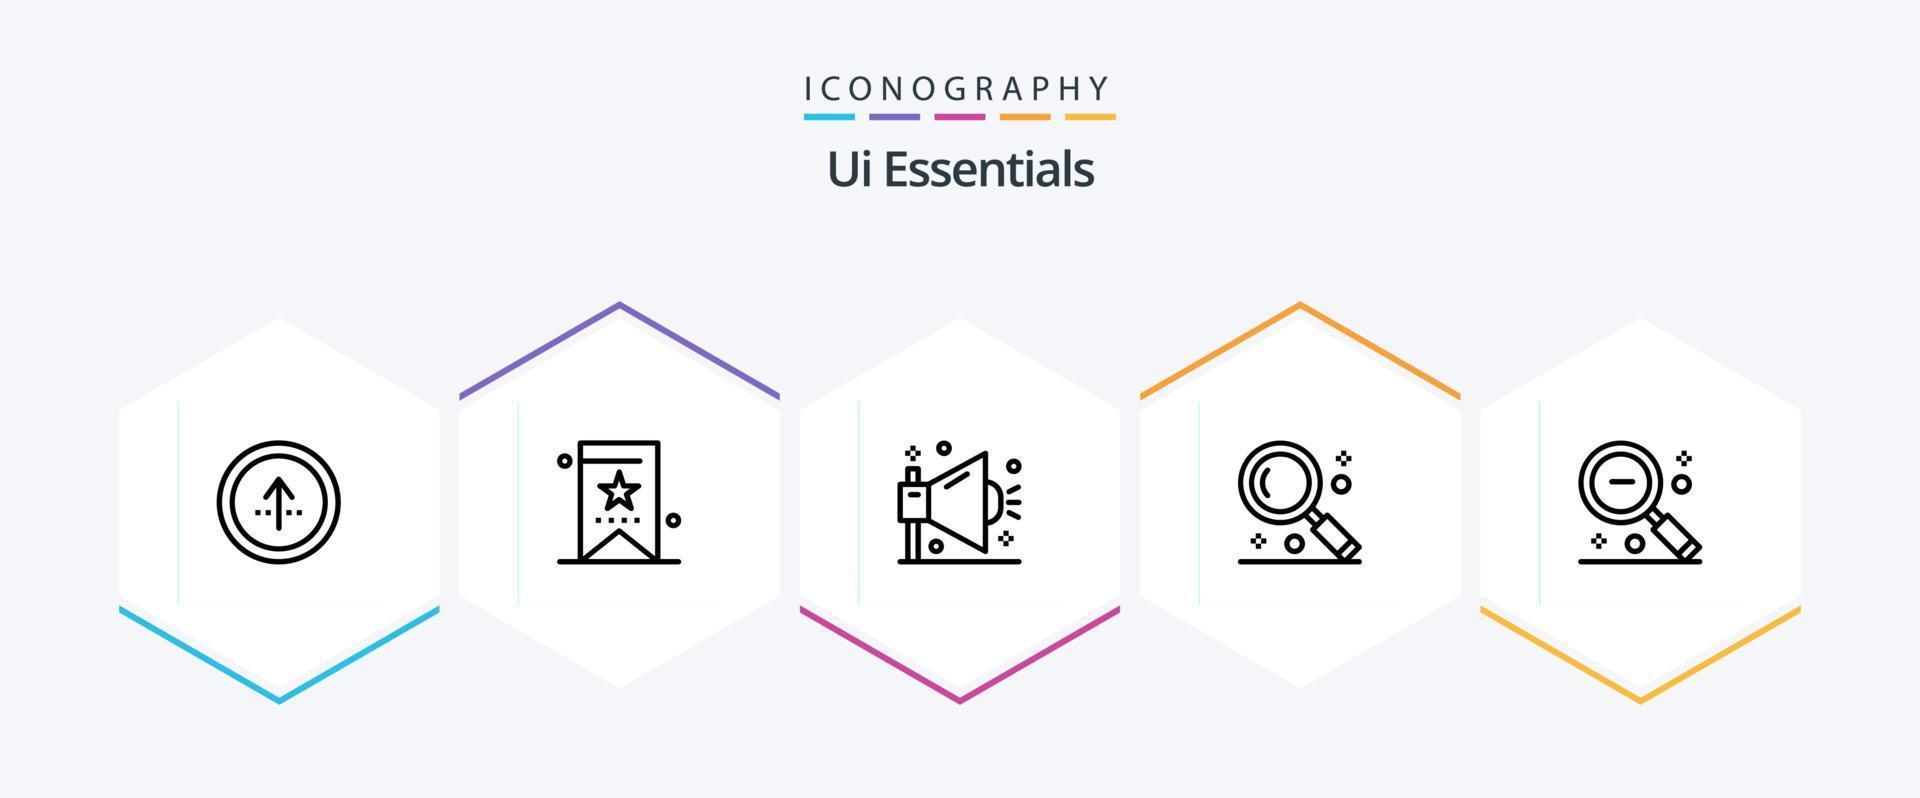 Ui Essentials 25 Line icon pack including magnifying. interface. tag. shout. optimization vector